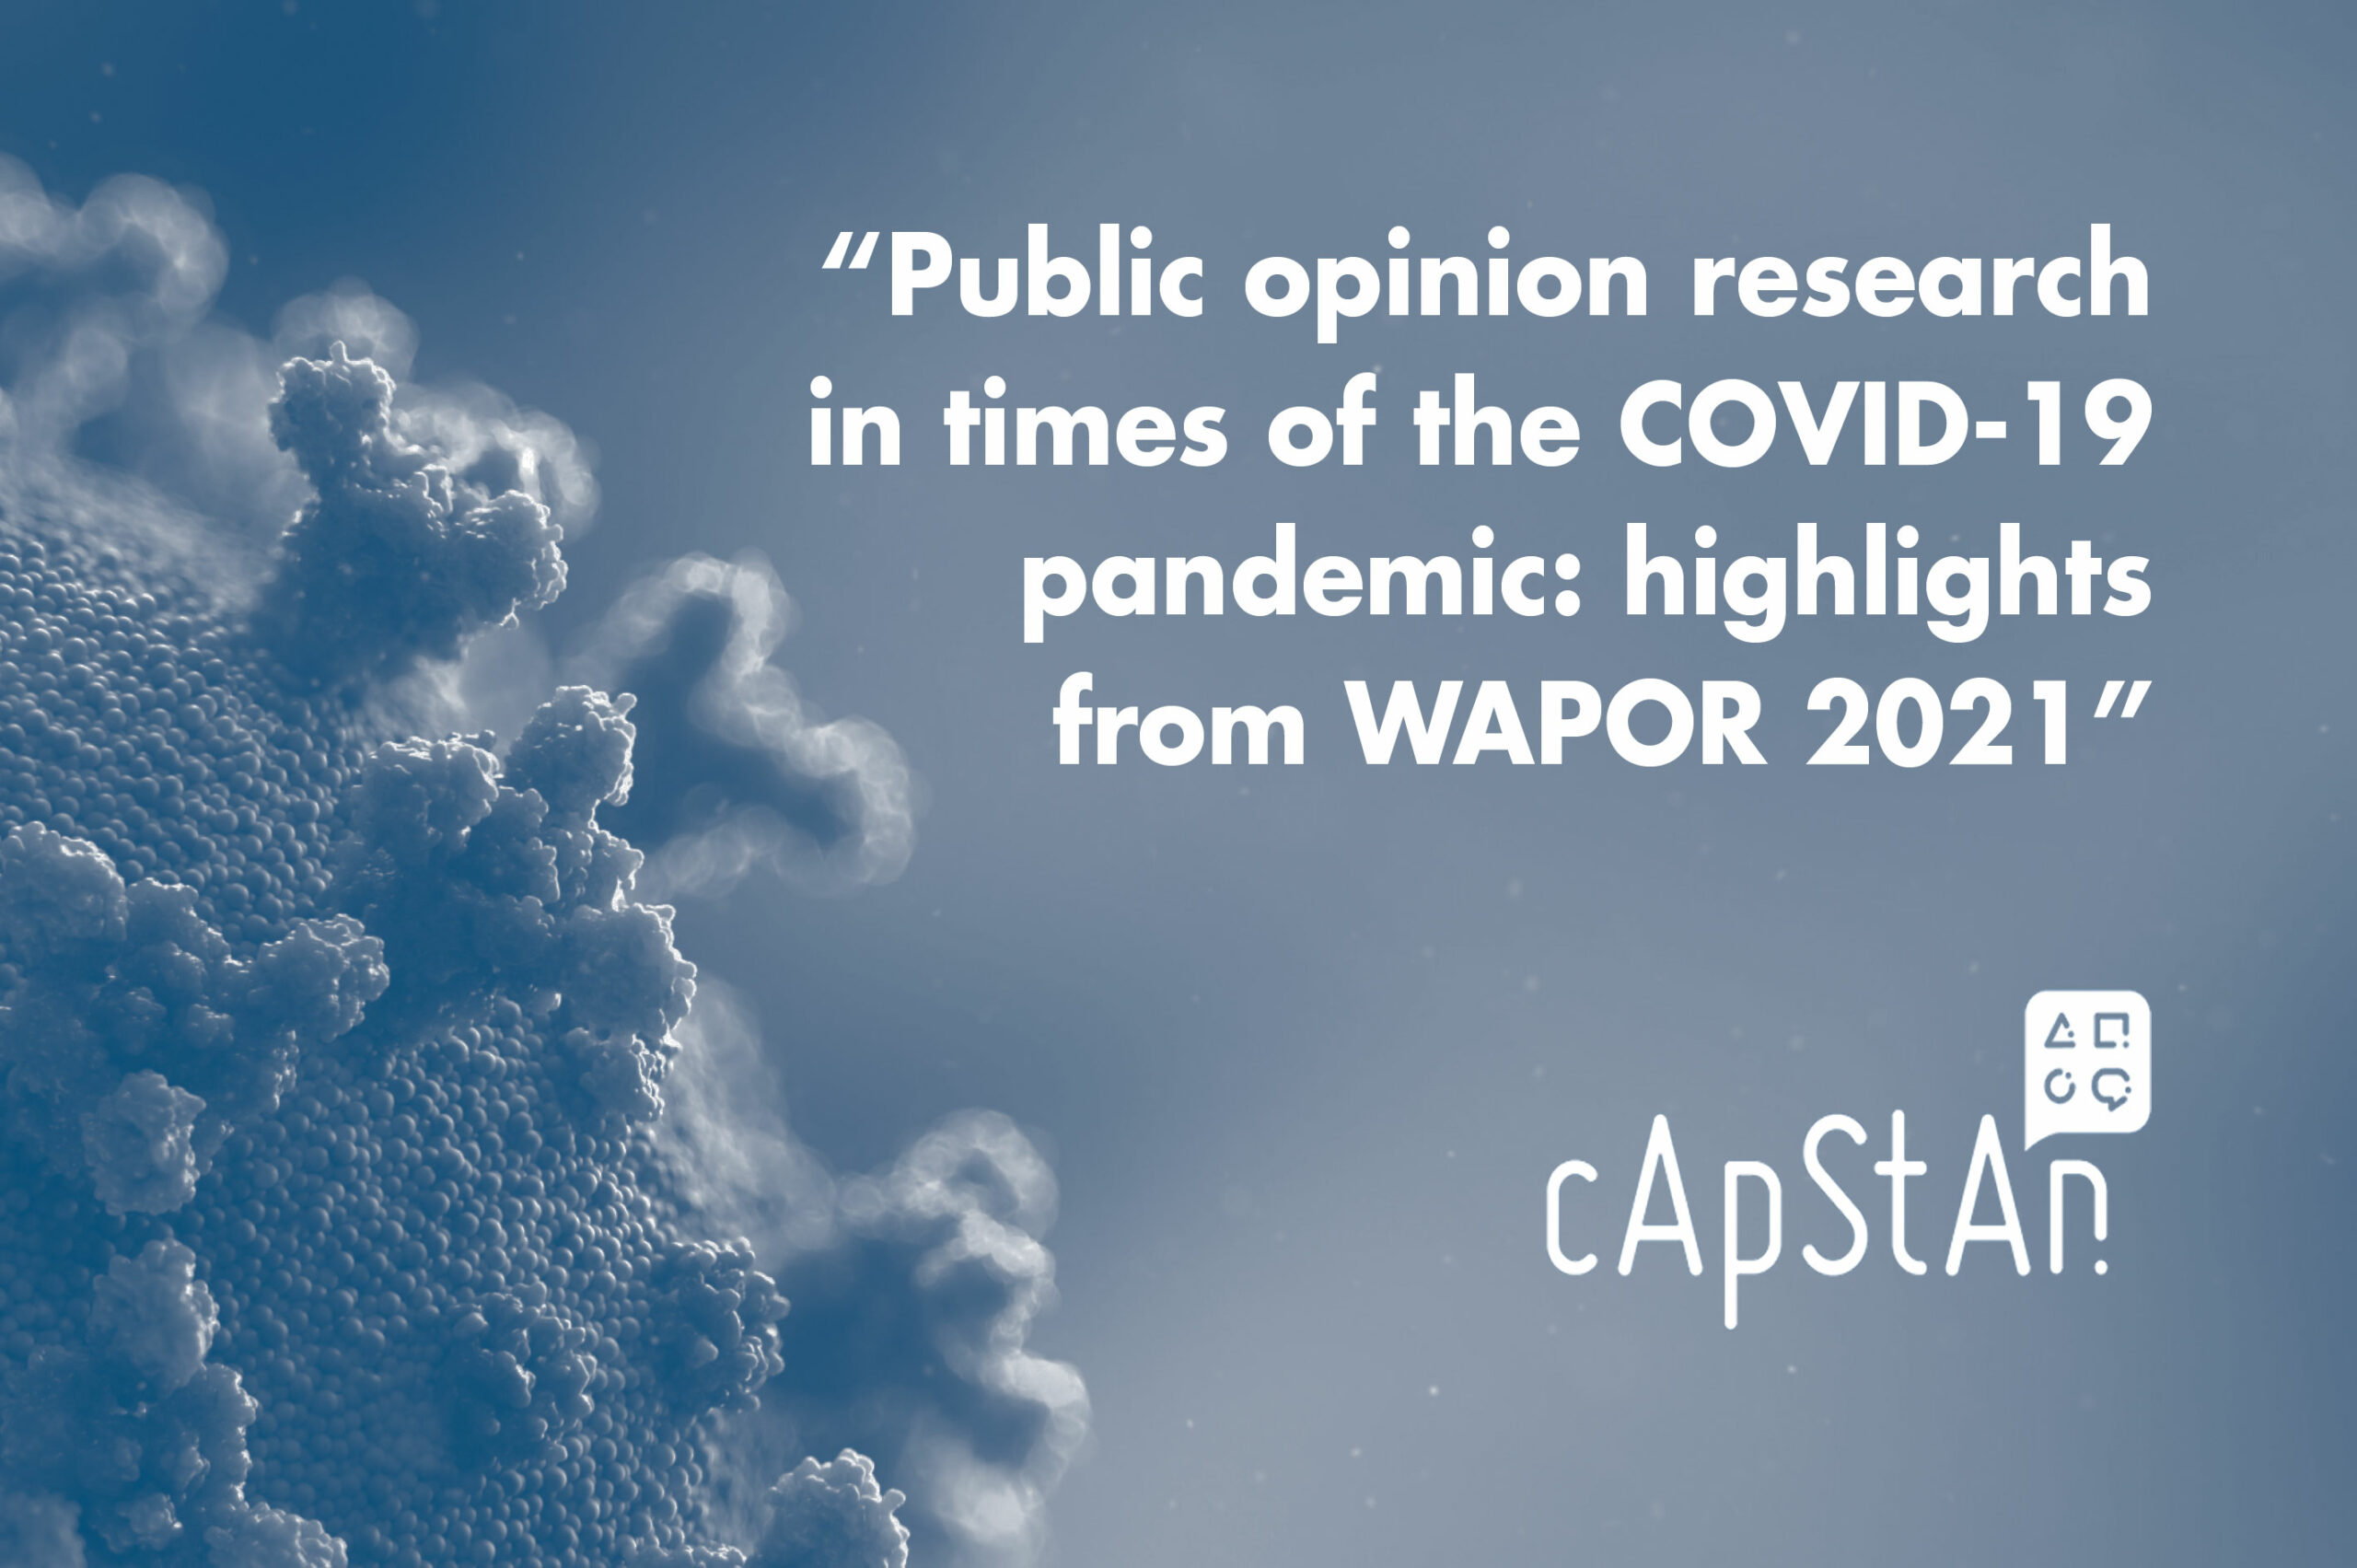 Public opinion research in times of the COVID-19 pandemic: highlights from WAPOR 2021